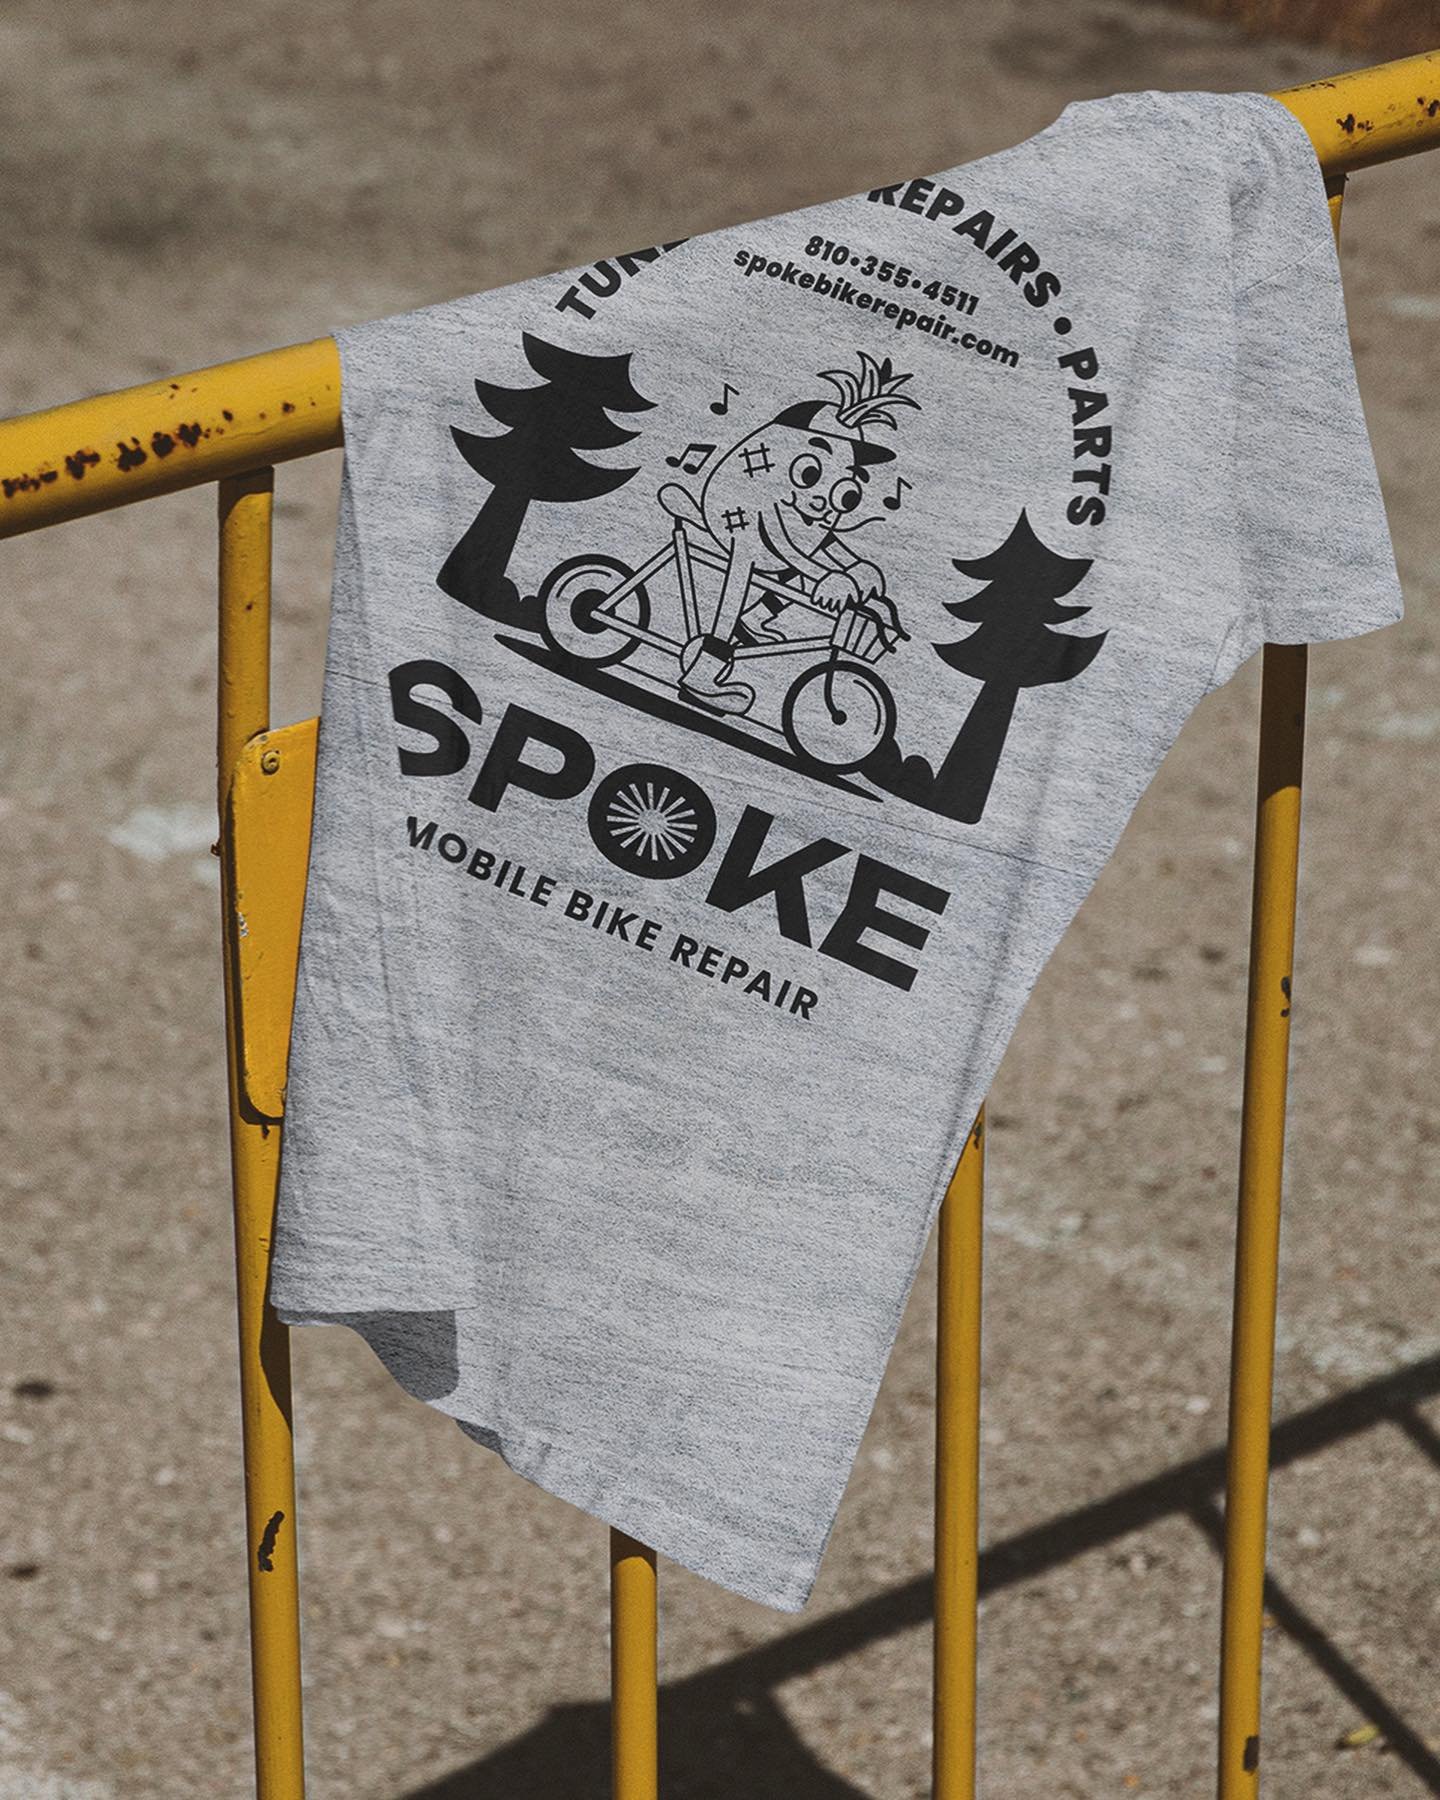 🍍Limited edition 🍍 Pineapple Pete tees just hit the shop. Impress your riding buddies next post ride chill with graphic tees that also support your favorite indy shop.

Shop link in profile or DM for details

#ridebikes #independentbikeshop #spokem